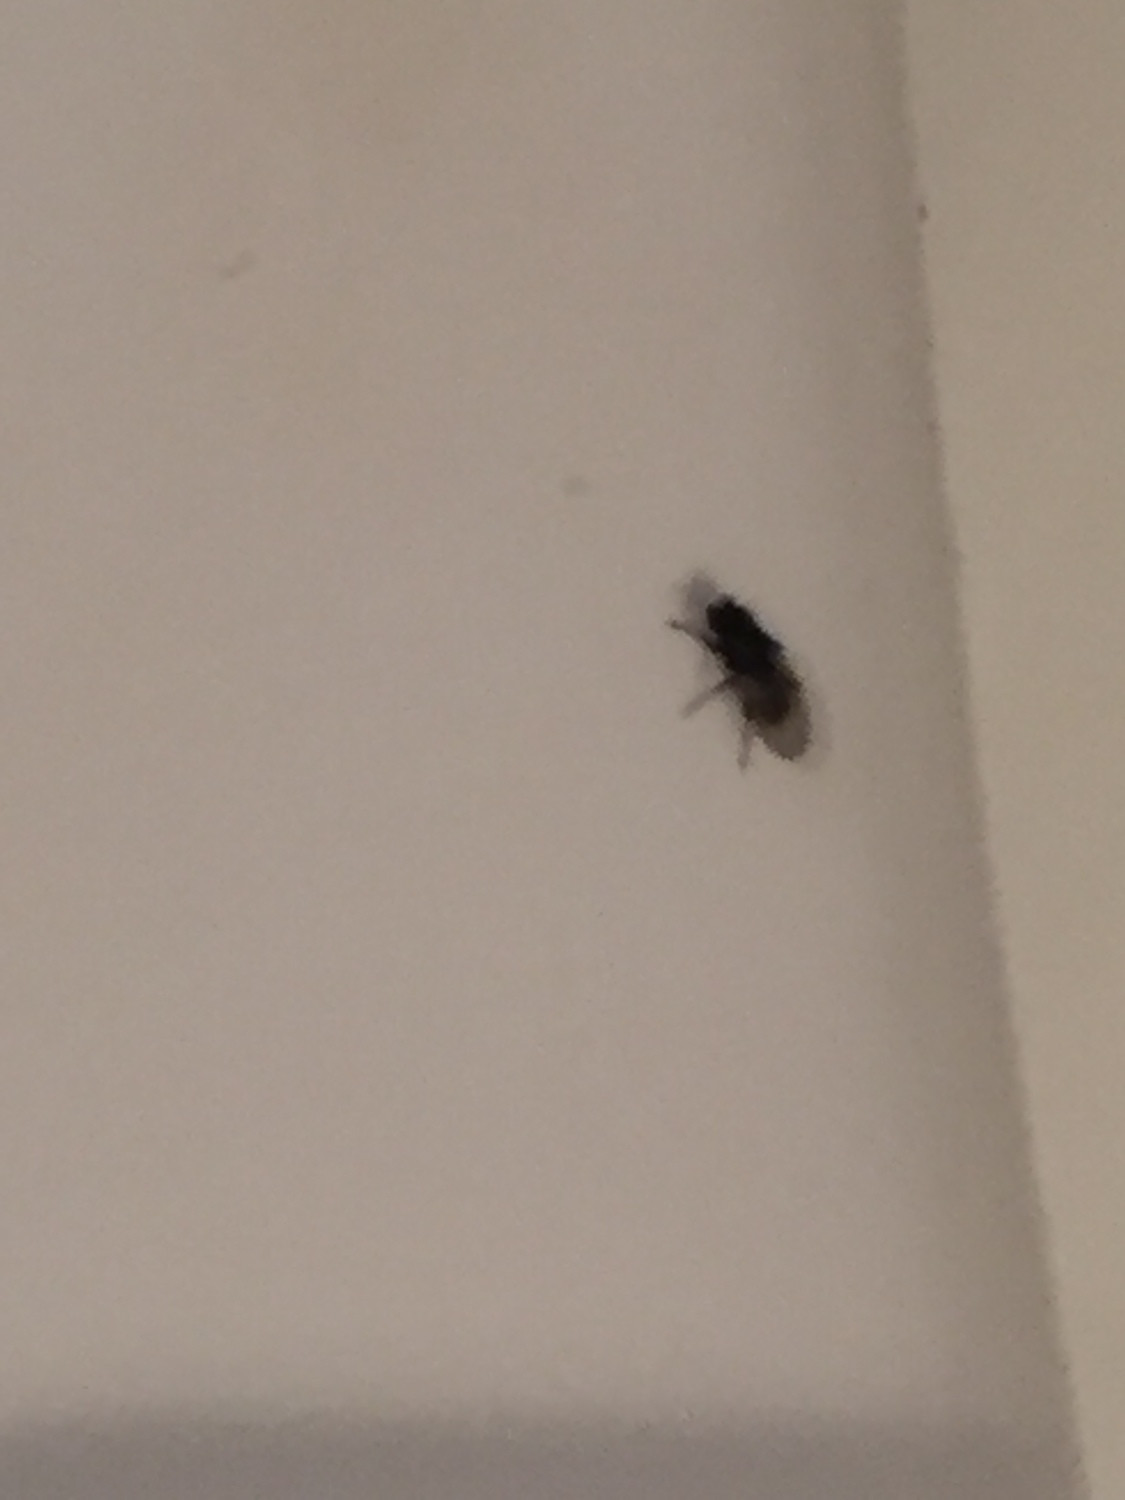 Small Flying Bugs In Bathroom Fresh My Bathroom Is Infested With Tiny Black Flies Ask An Expert Of Small Flying Bugs In Bathroom 